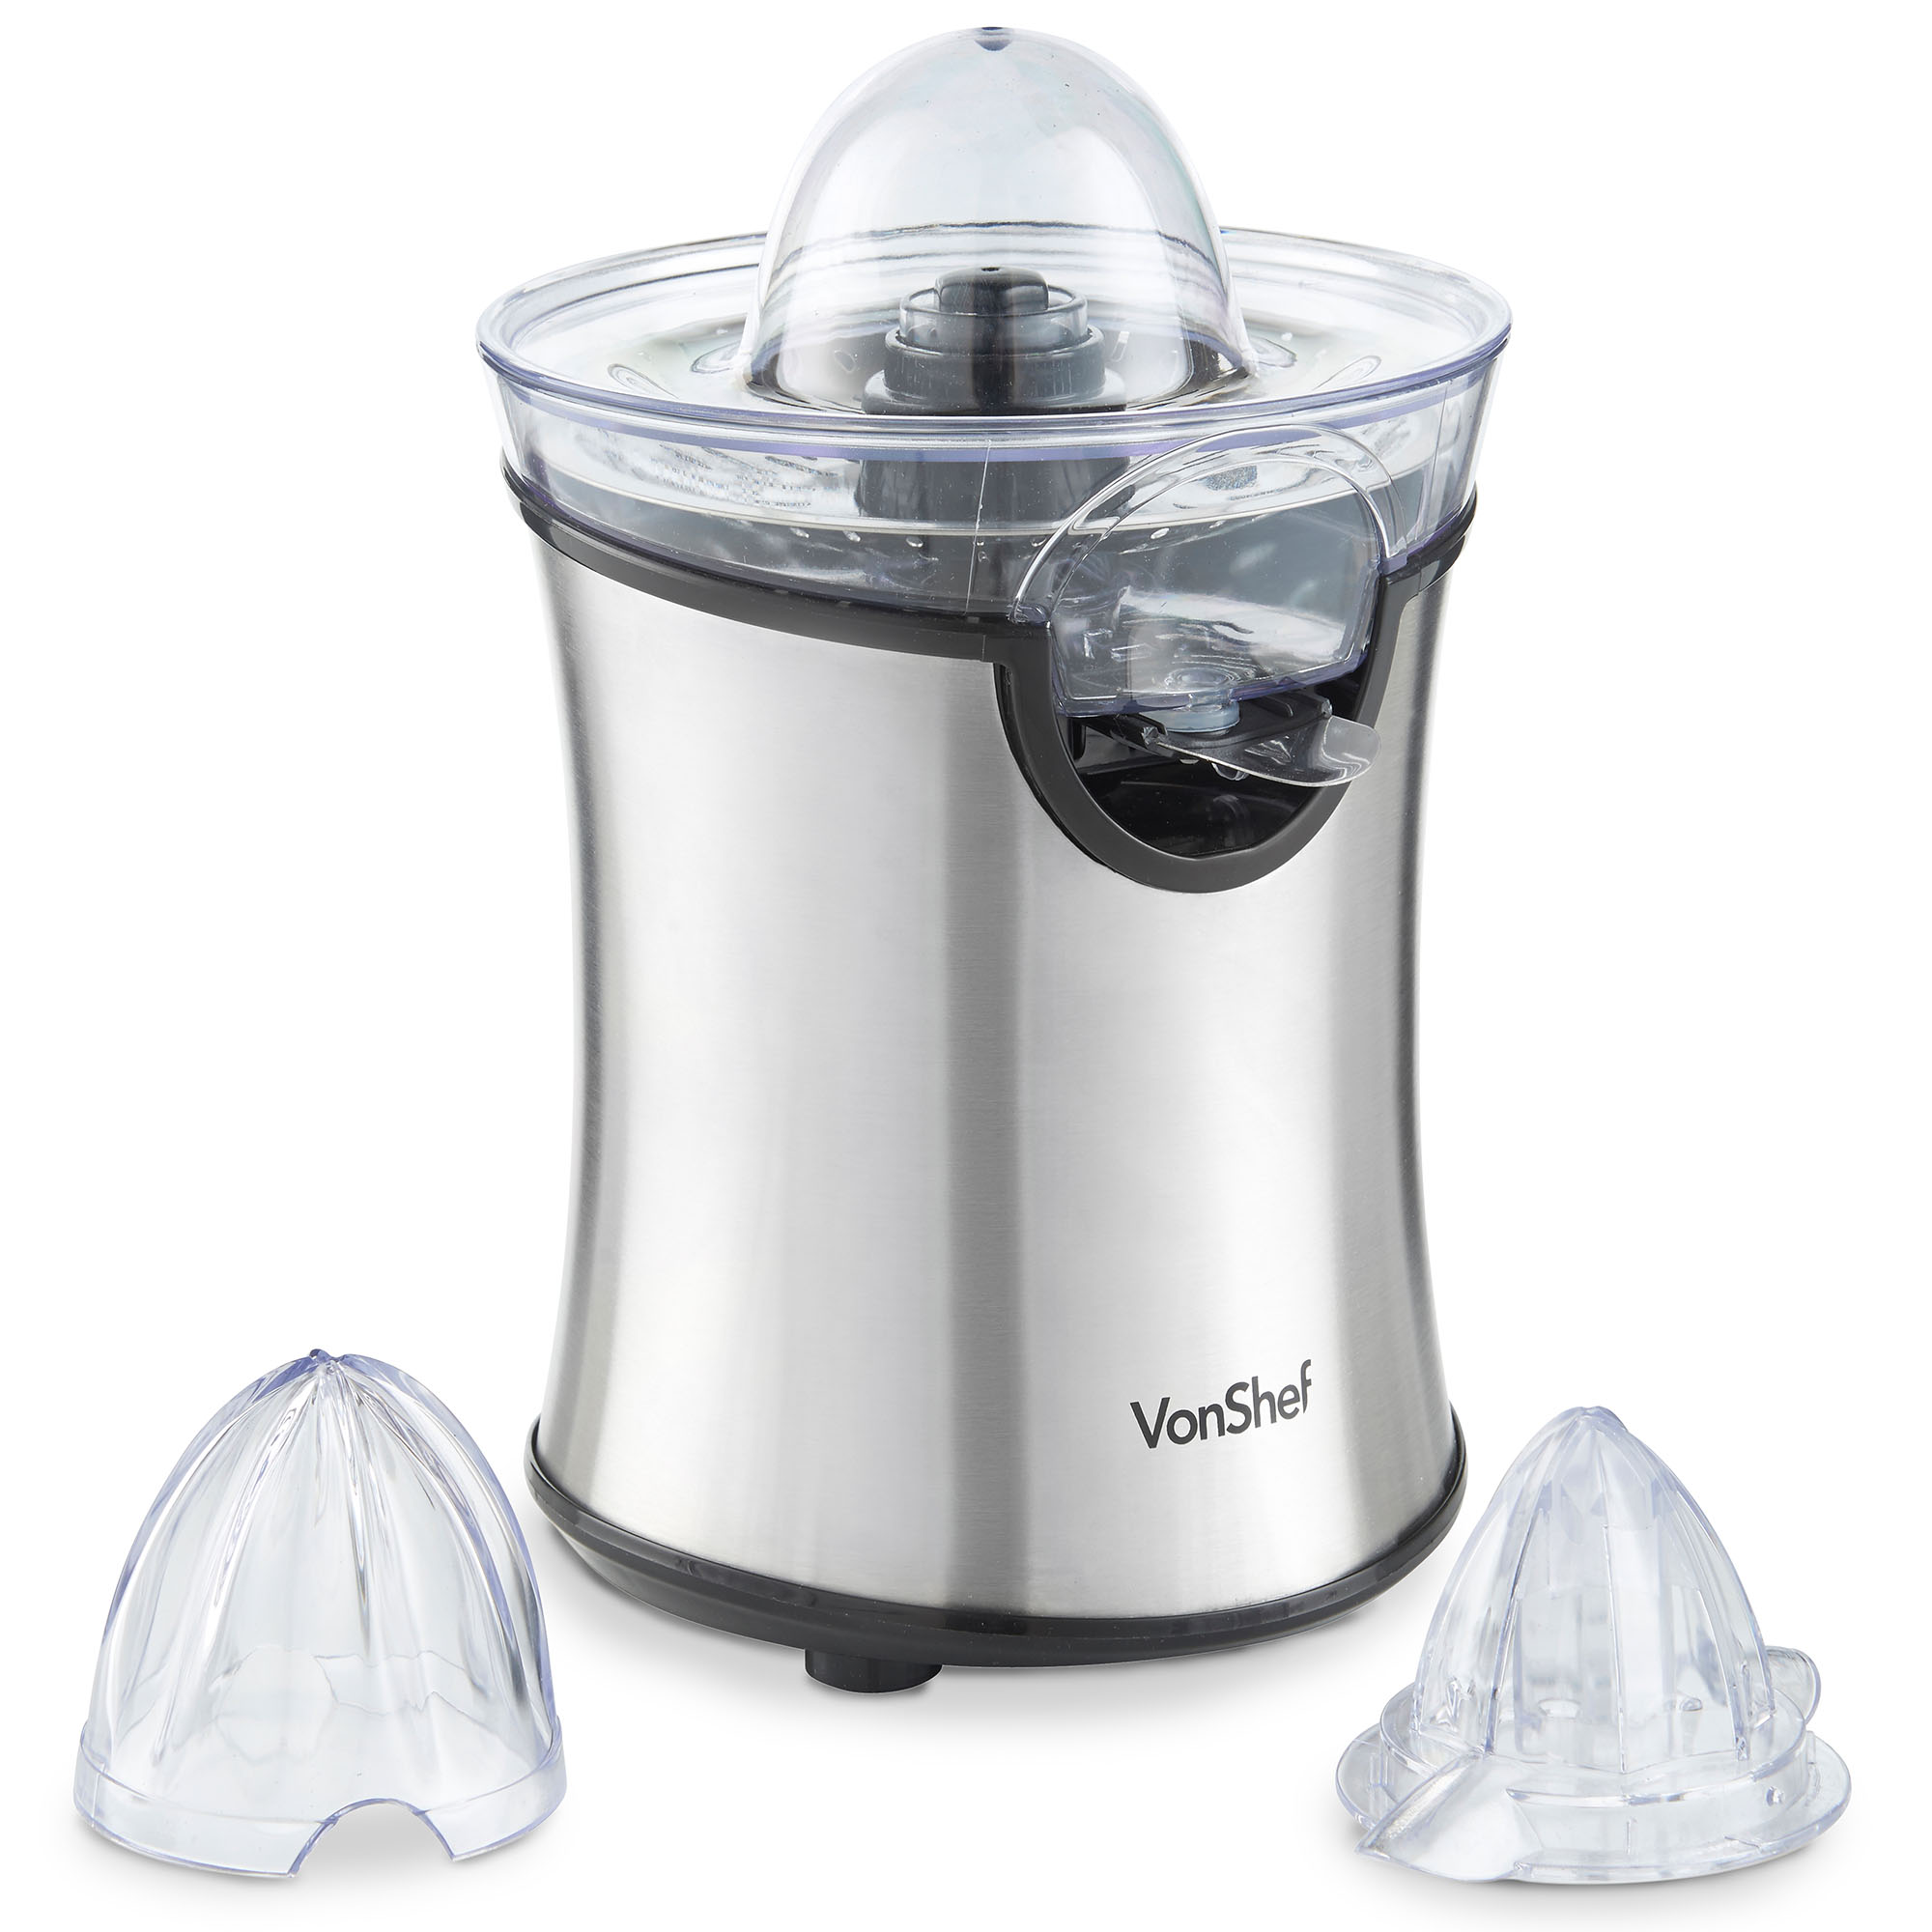 VonShef Electric Citrus Juicer Fruit 100W Stainless Steel